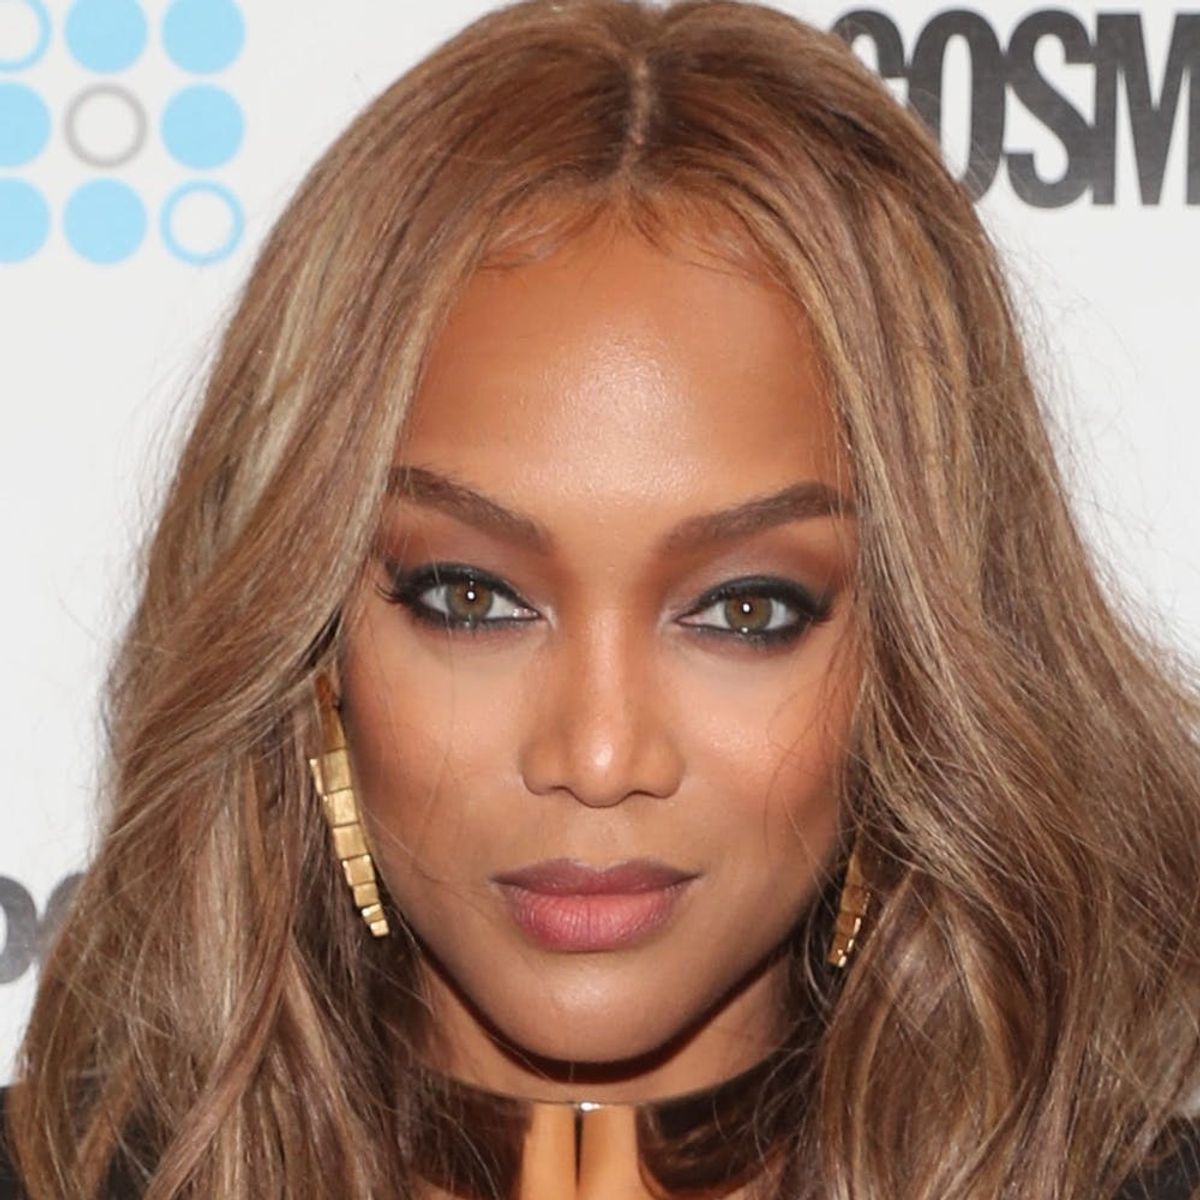 Tyra Banks Reveals She Wasn’t Quite Ready to Share That Pic of Her Son With the World